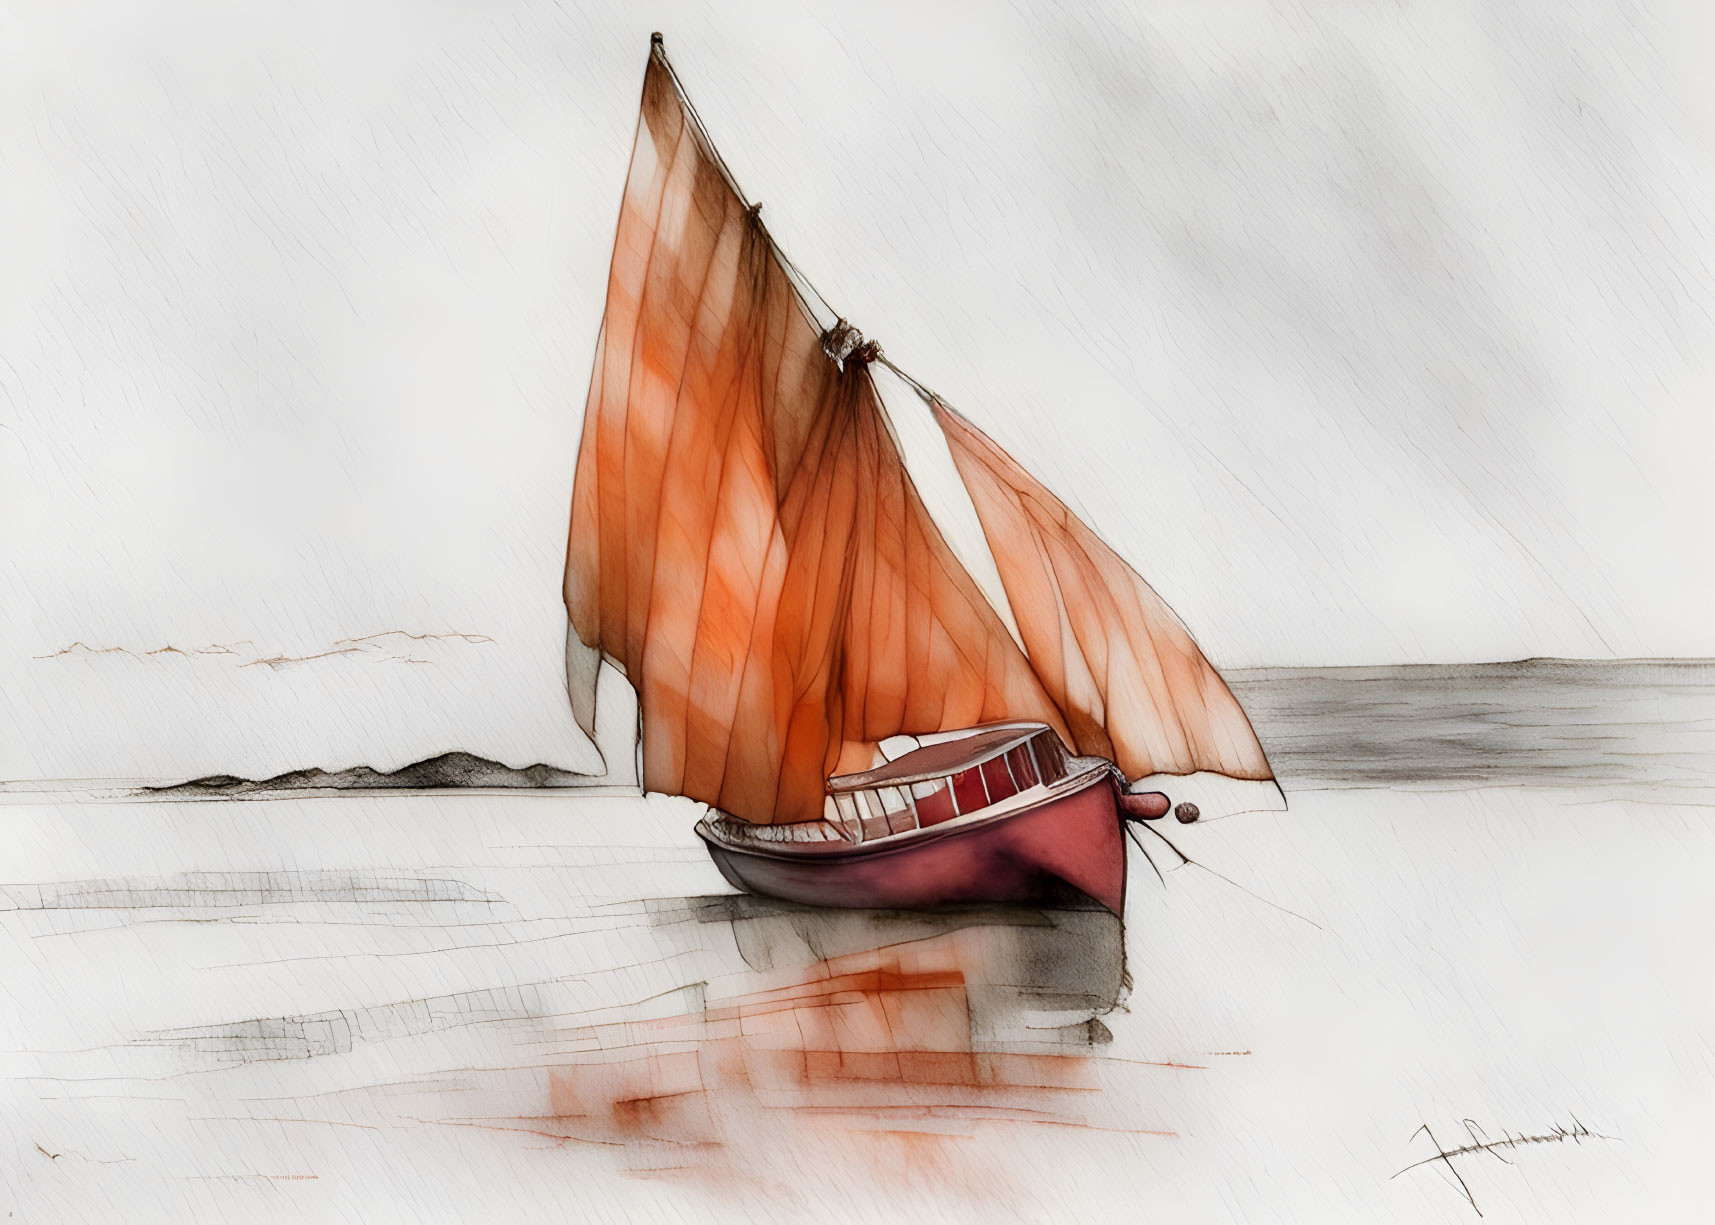 Sailboat Watercolor Illustration with Orange Sails on Calm Waters